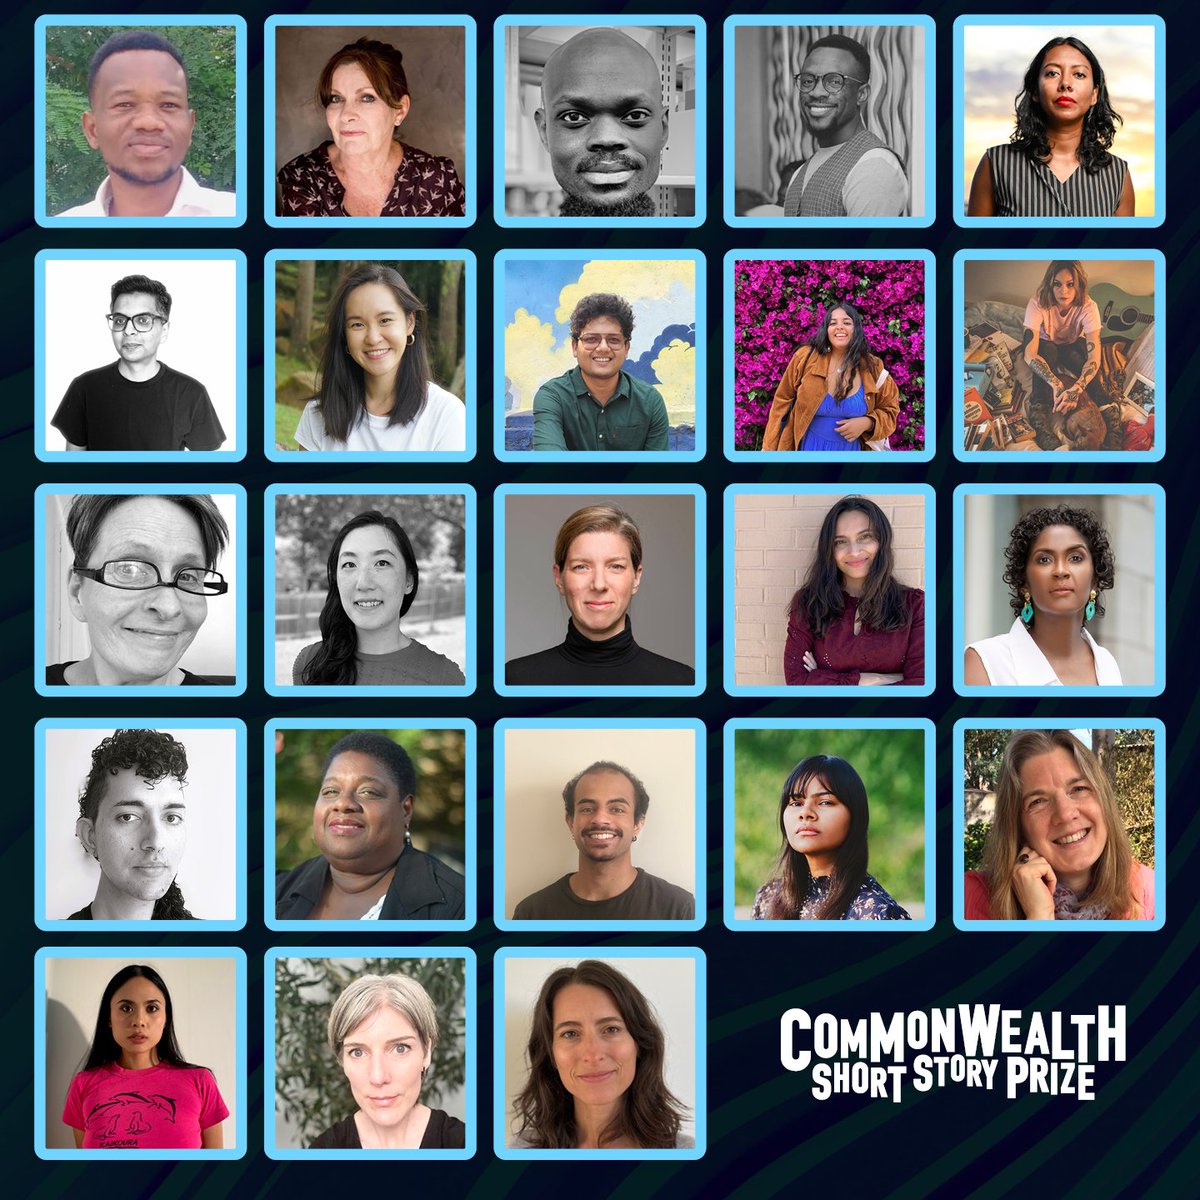 📣 MEET THE 2024 SHORTLIST! 👋 We are delighted to present the 2024 #CWprize shortlist! The 23 writers have been selected by an international judging panel from 7,359 entries in a record-breaking year. Congratulations to you all! Read more 👇 commonwealthfoundation.com/short-story-pr…